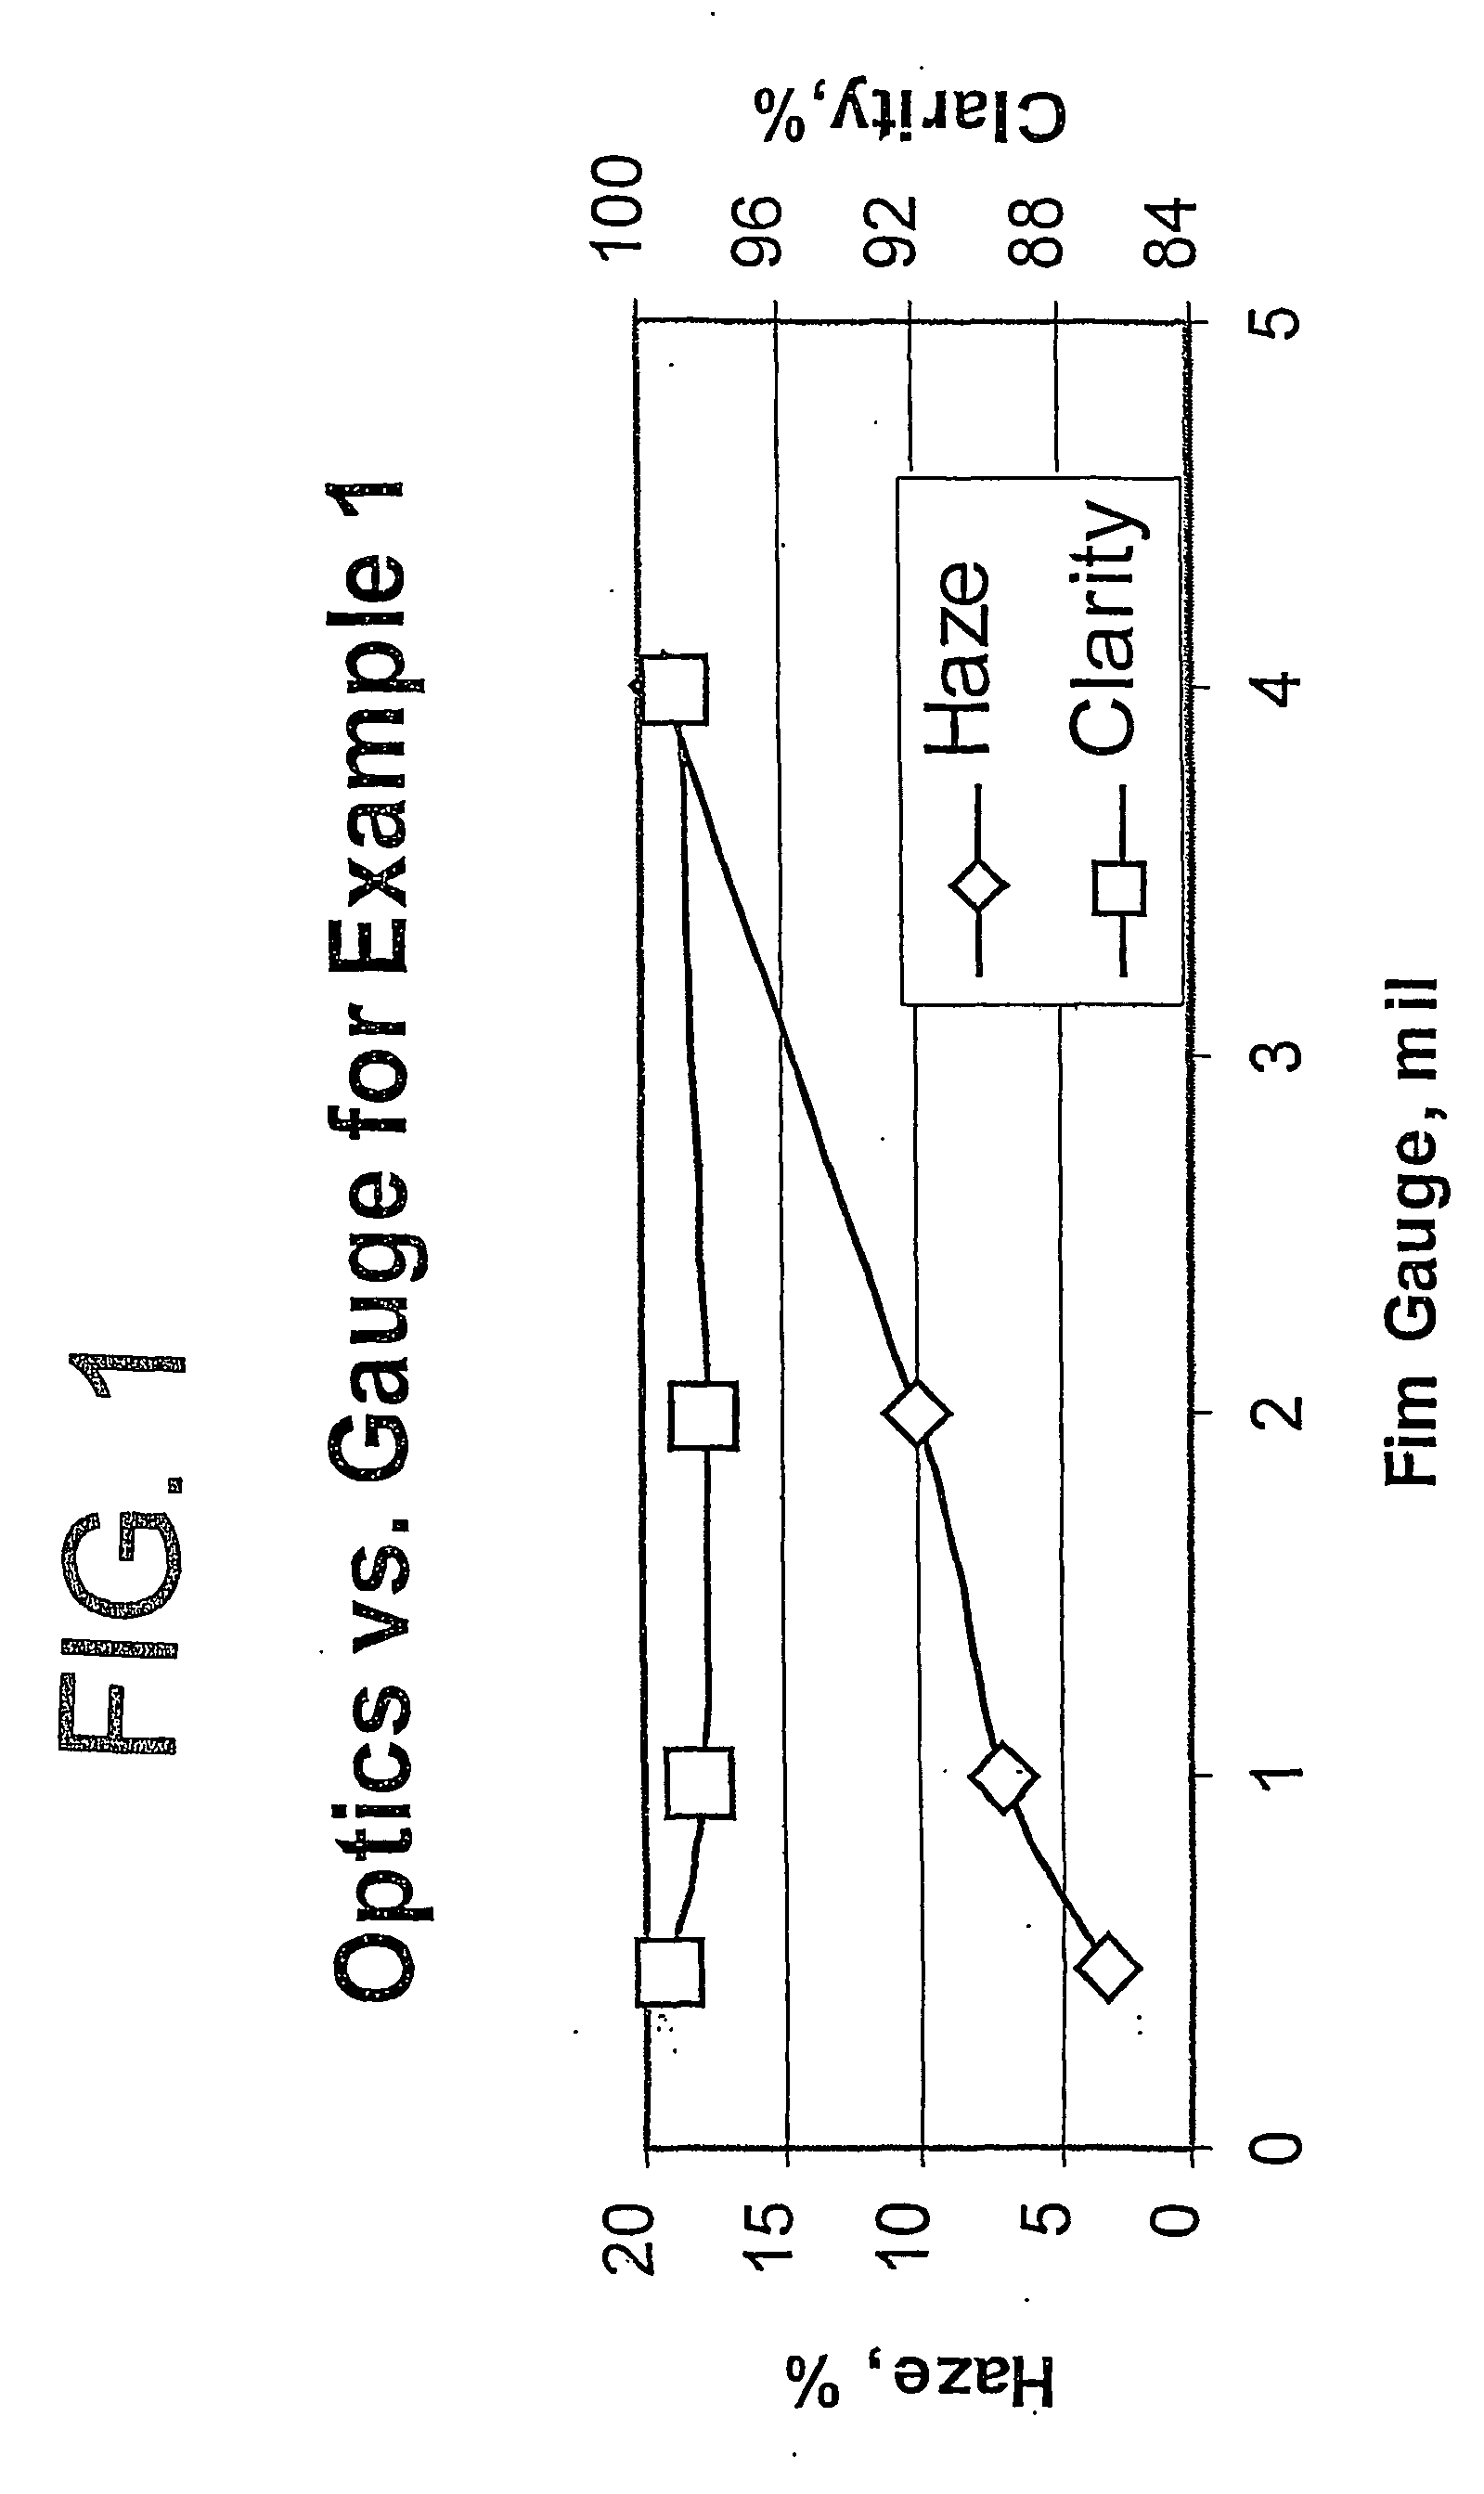 Polypropylene composition for air quenched blown films